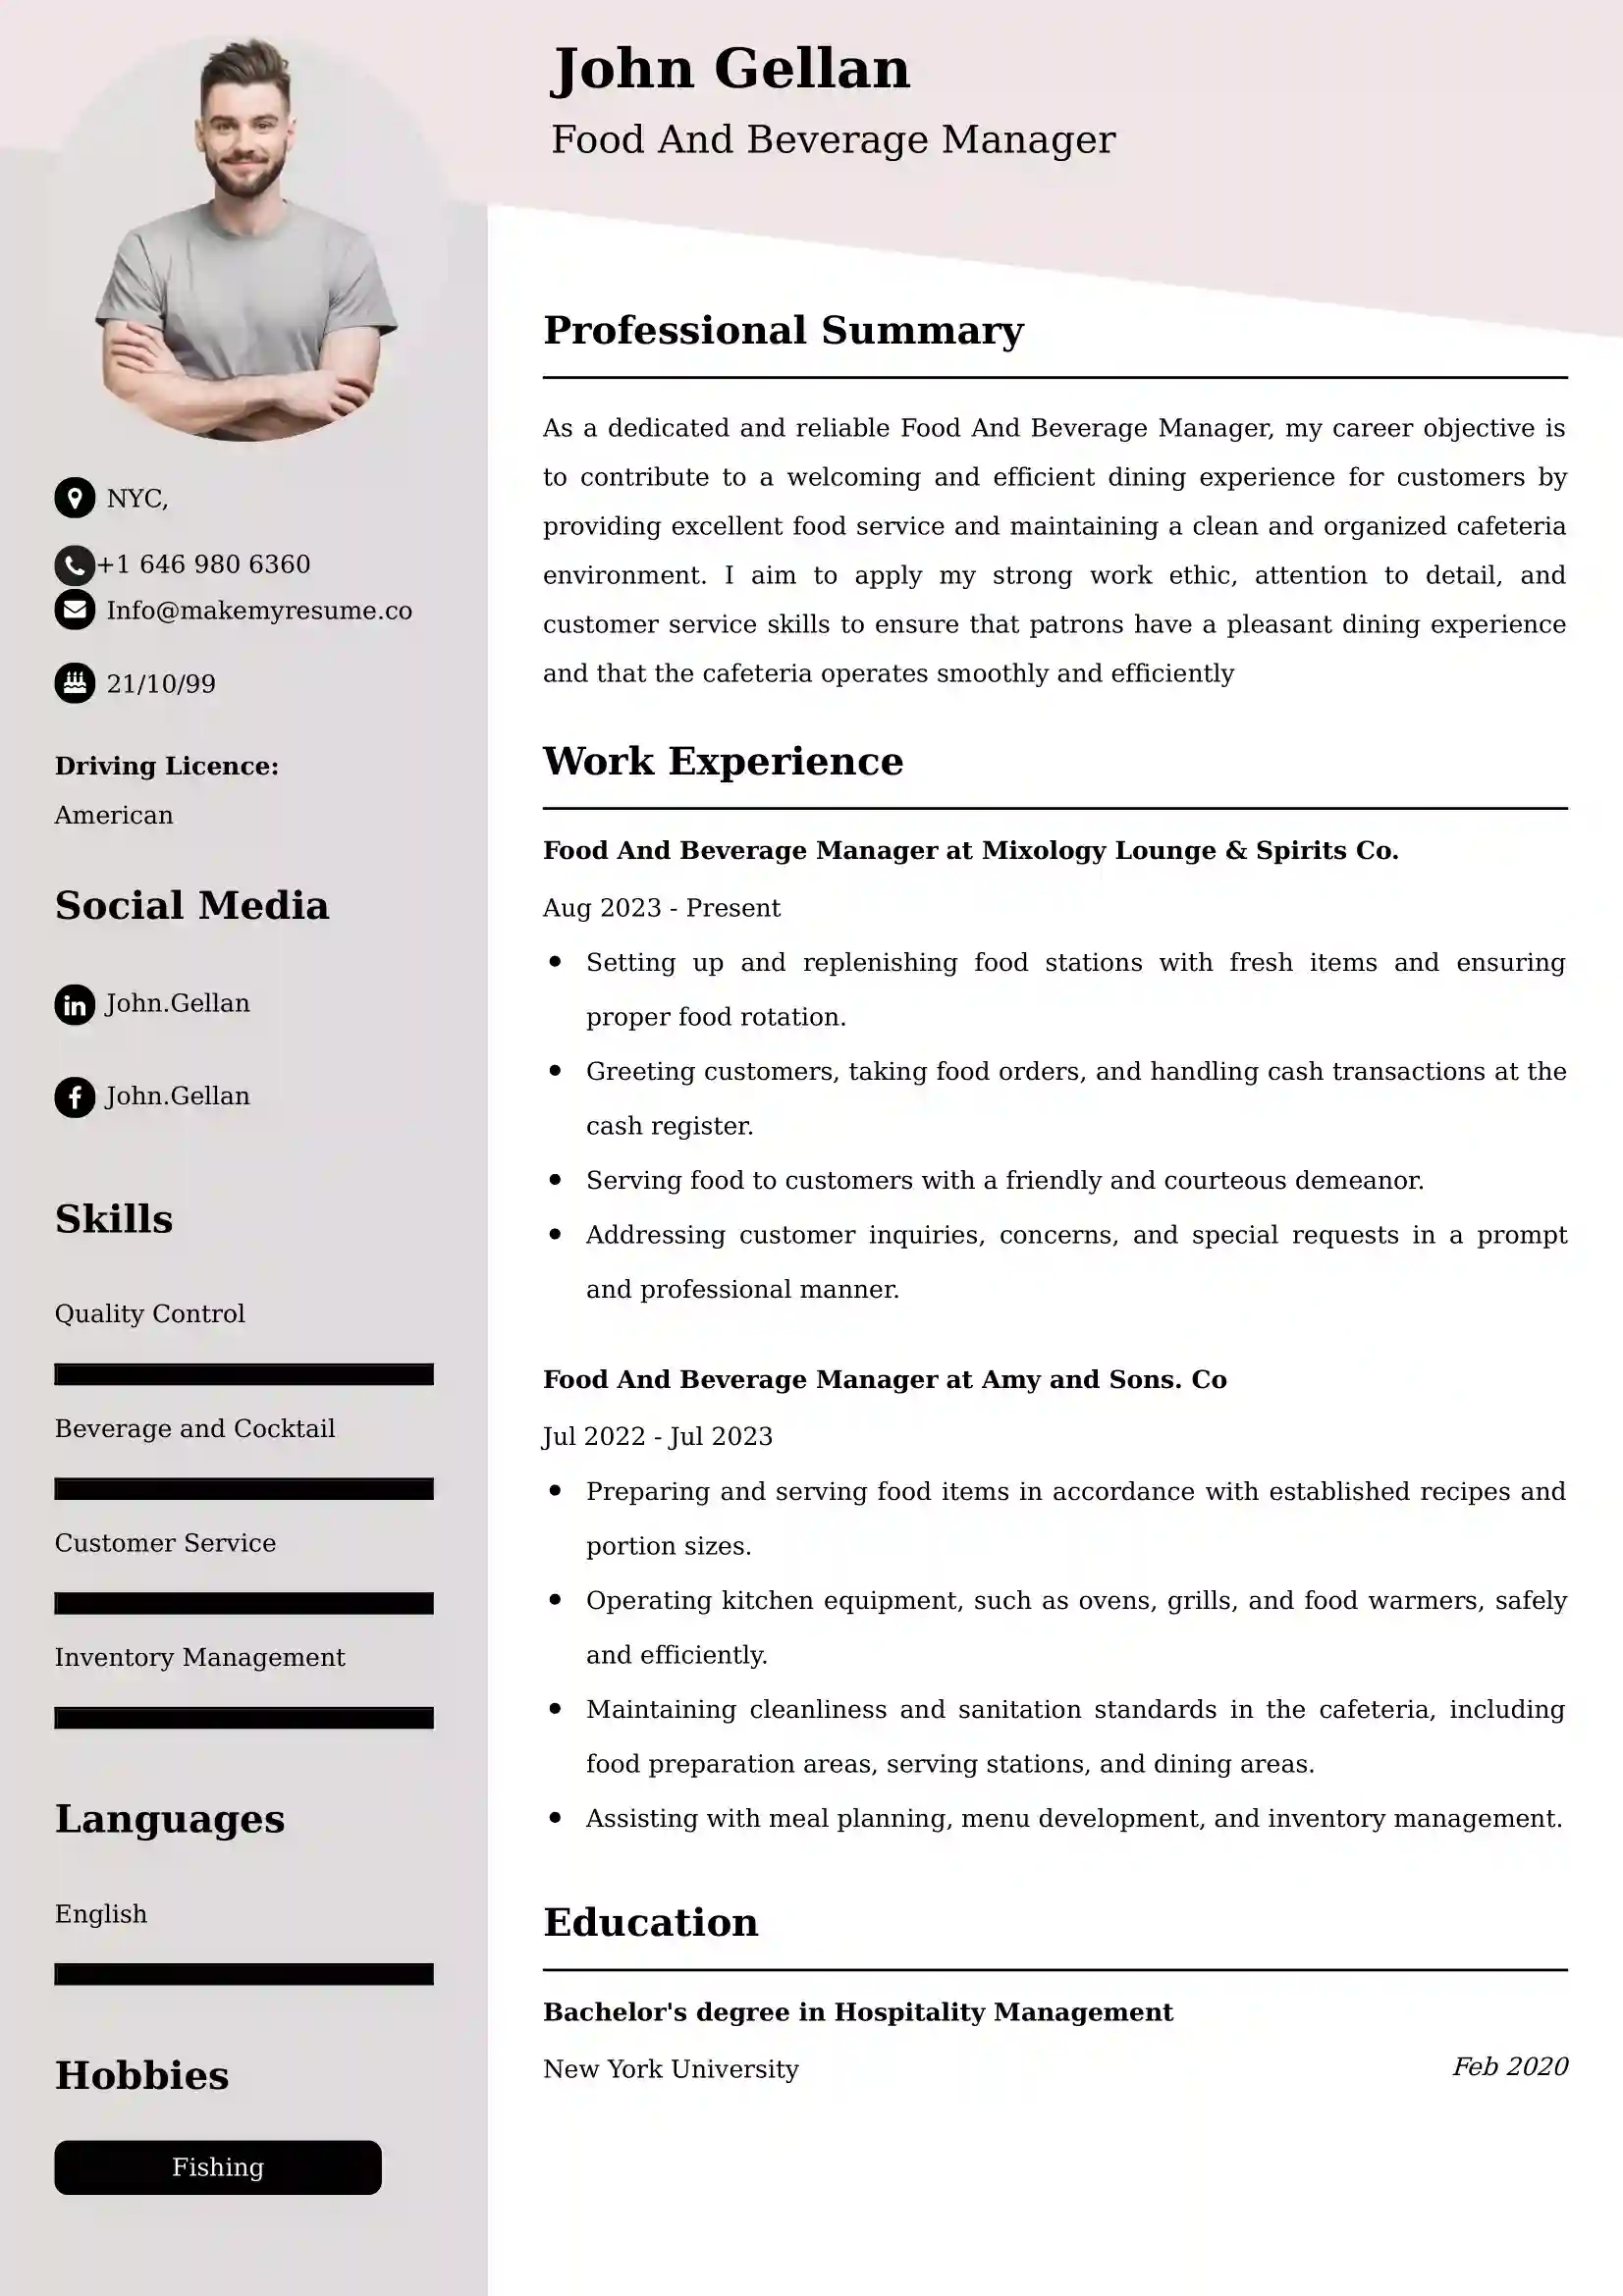 Food And Beverage Manager Resume Examples - UK Format, Latest Template.